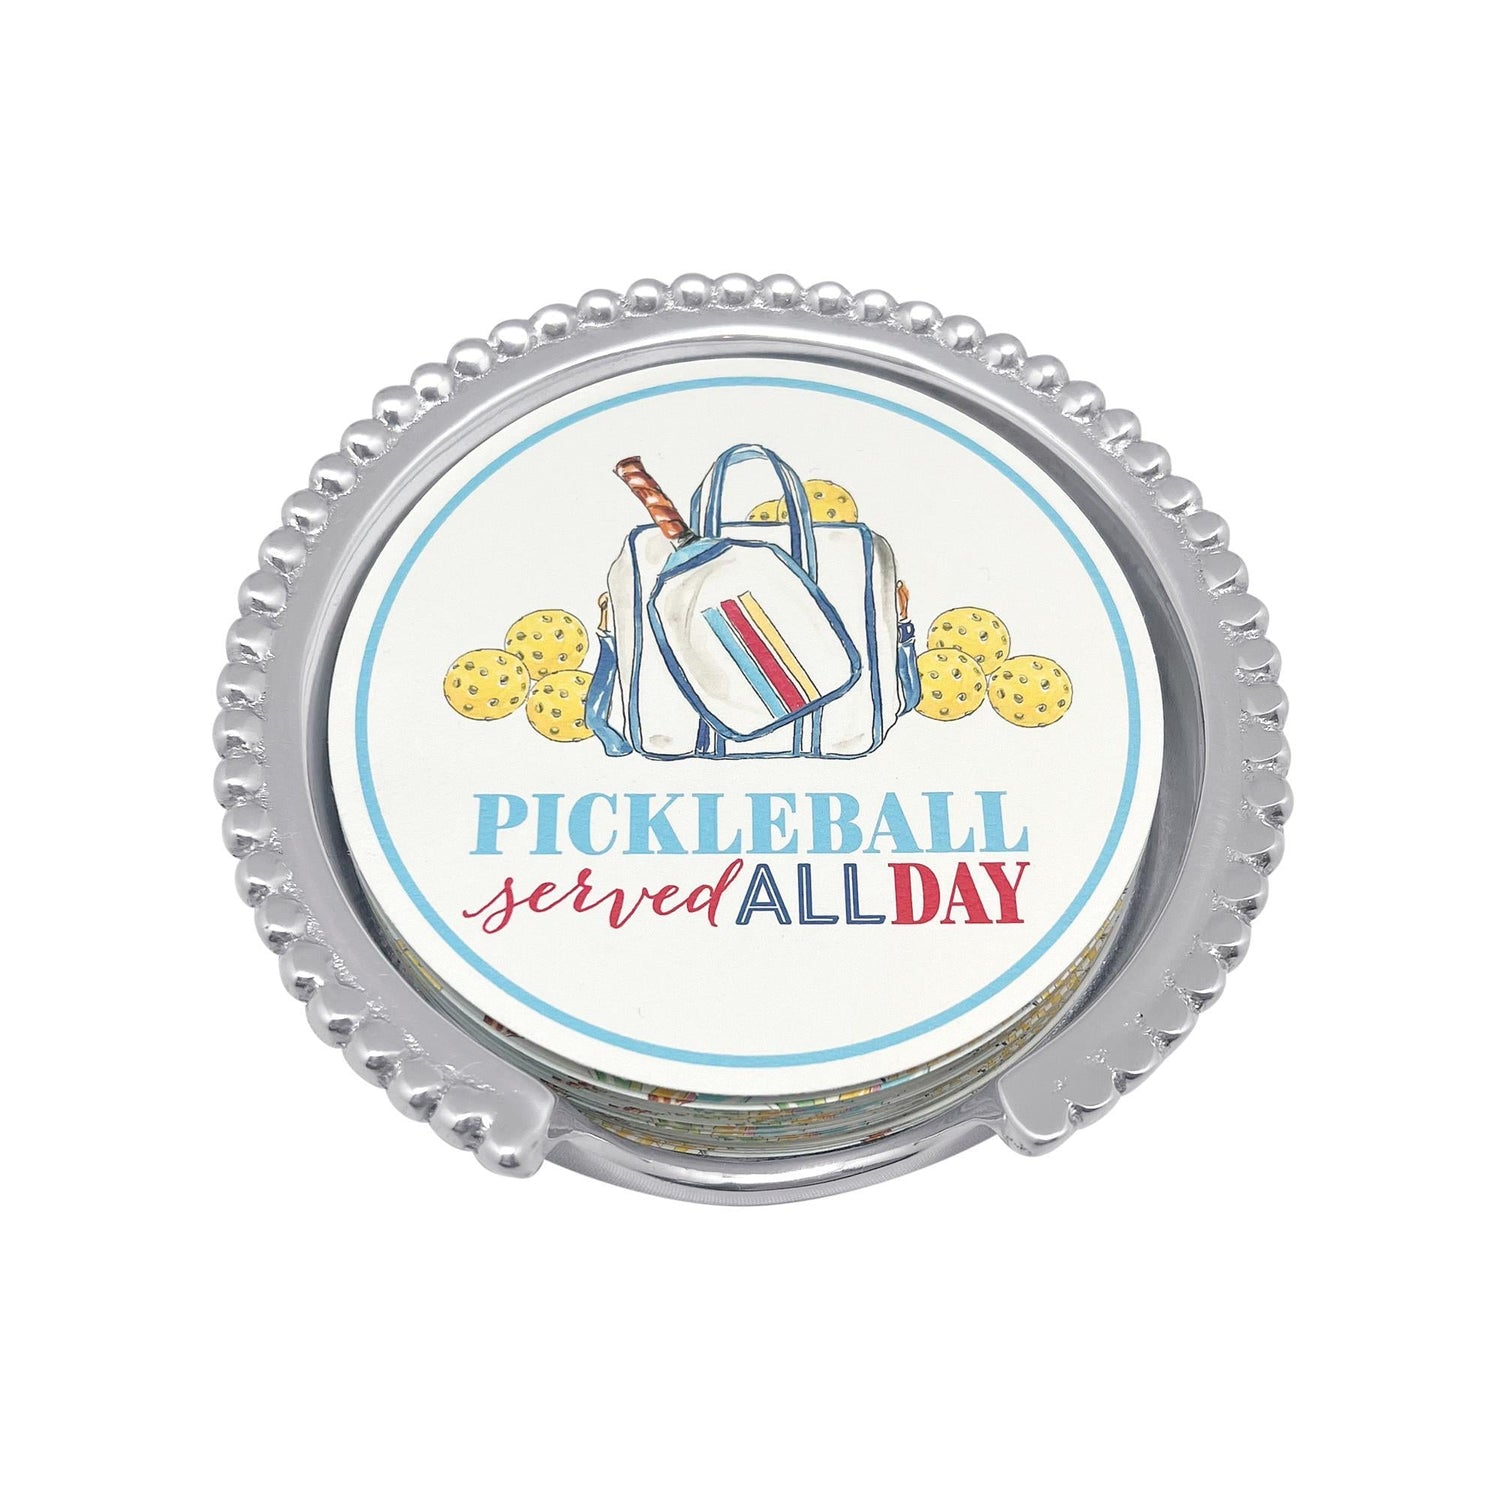 Pickleball Served All Day Beaded Coaster Set - Gaines Jewelers